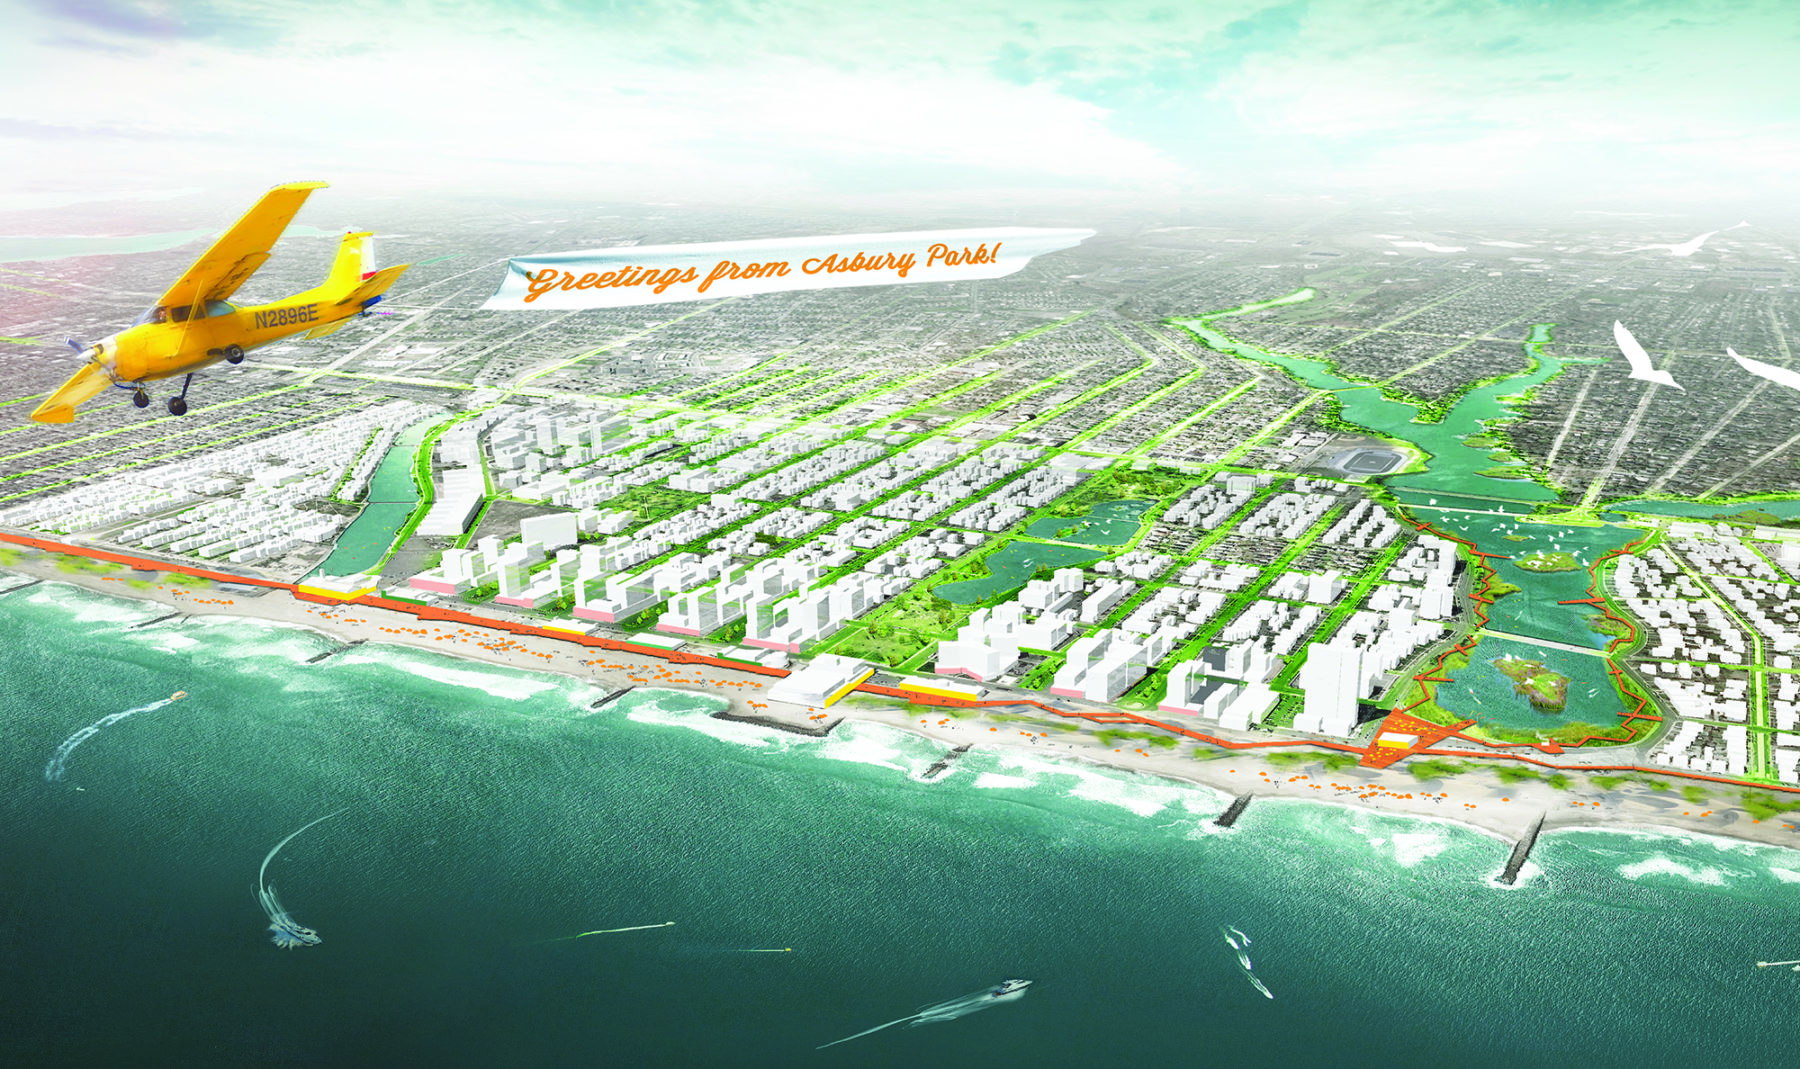 Aerial rendering of Asbury Park with vision of the site. A helicopter with a greetings banner flies overhead